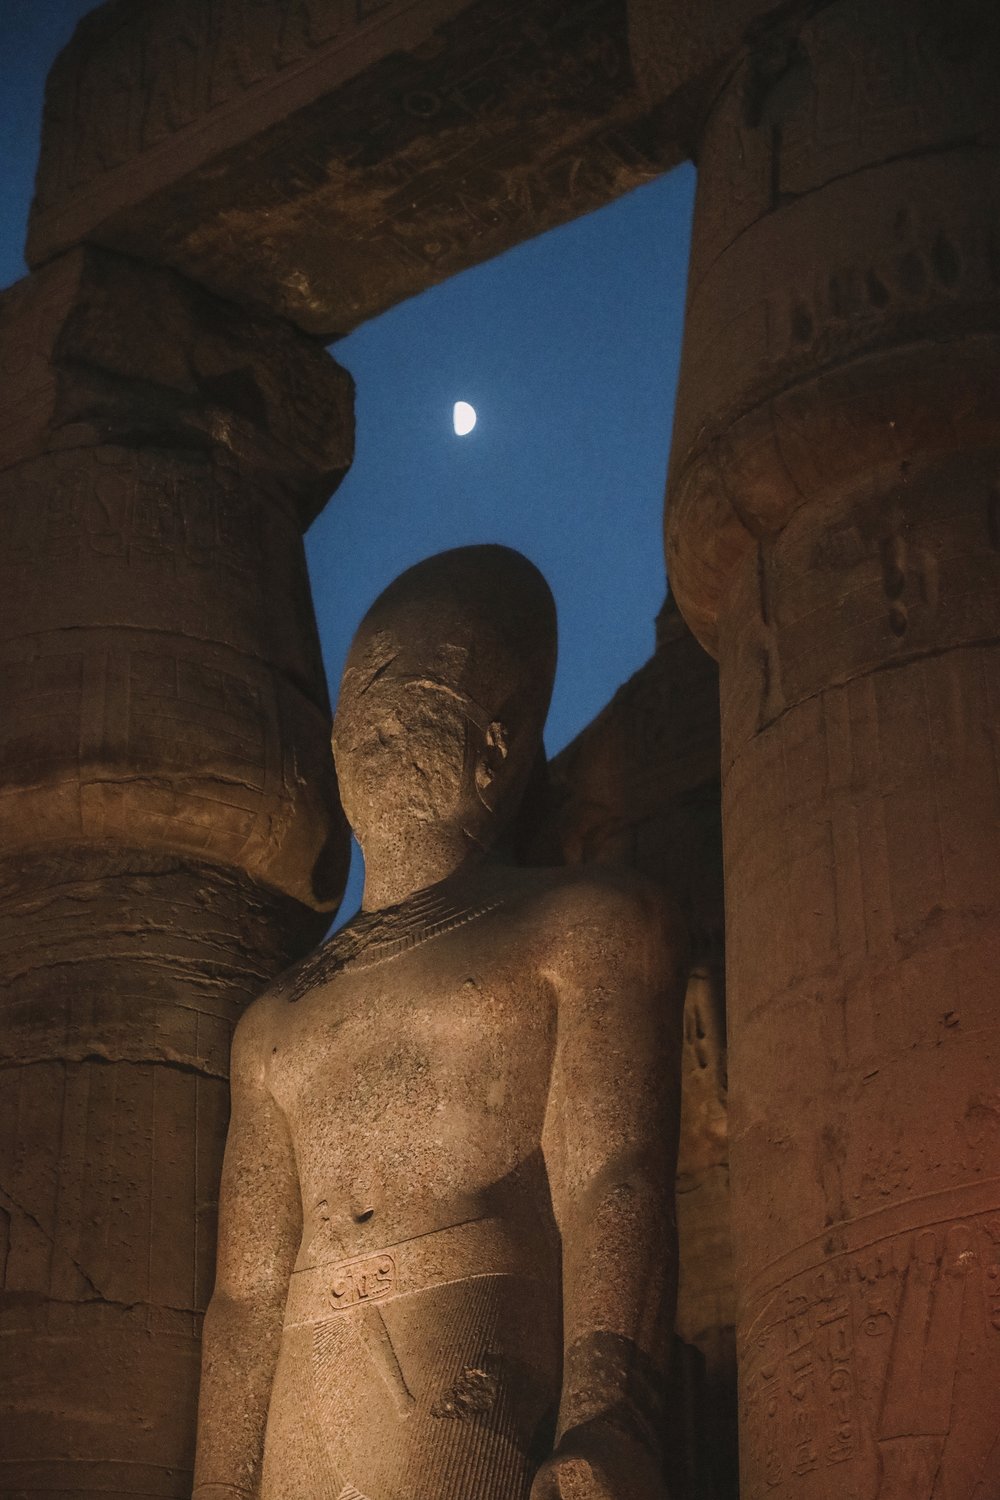 Pharaoh statue and the moon - Luxor Temple - Luxor - Egypt